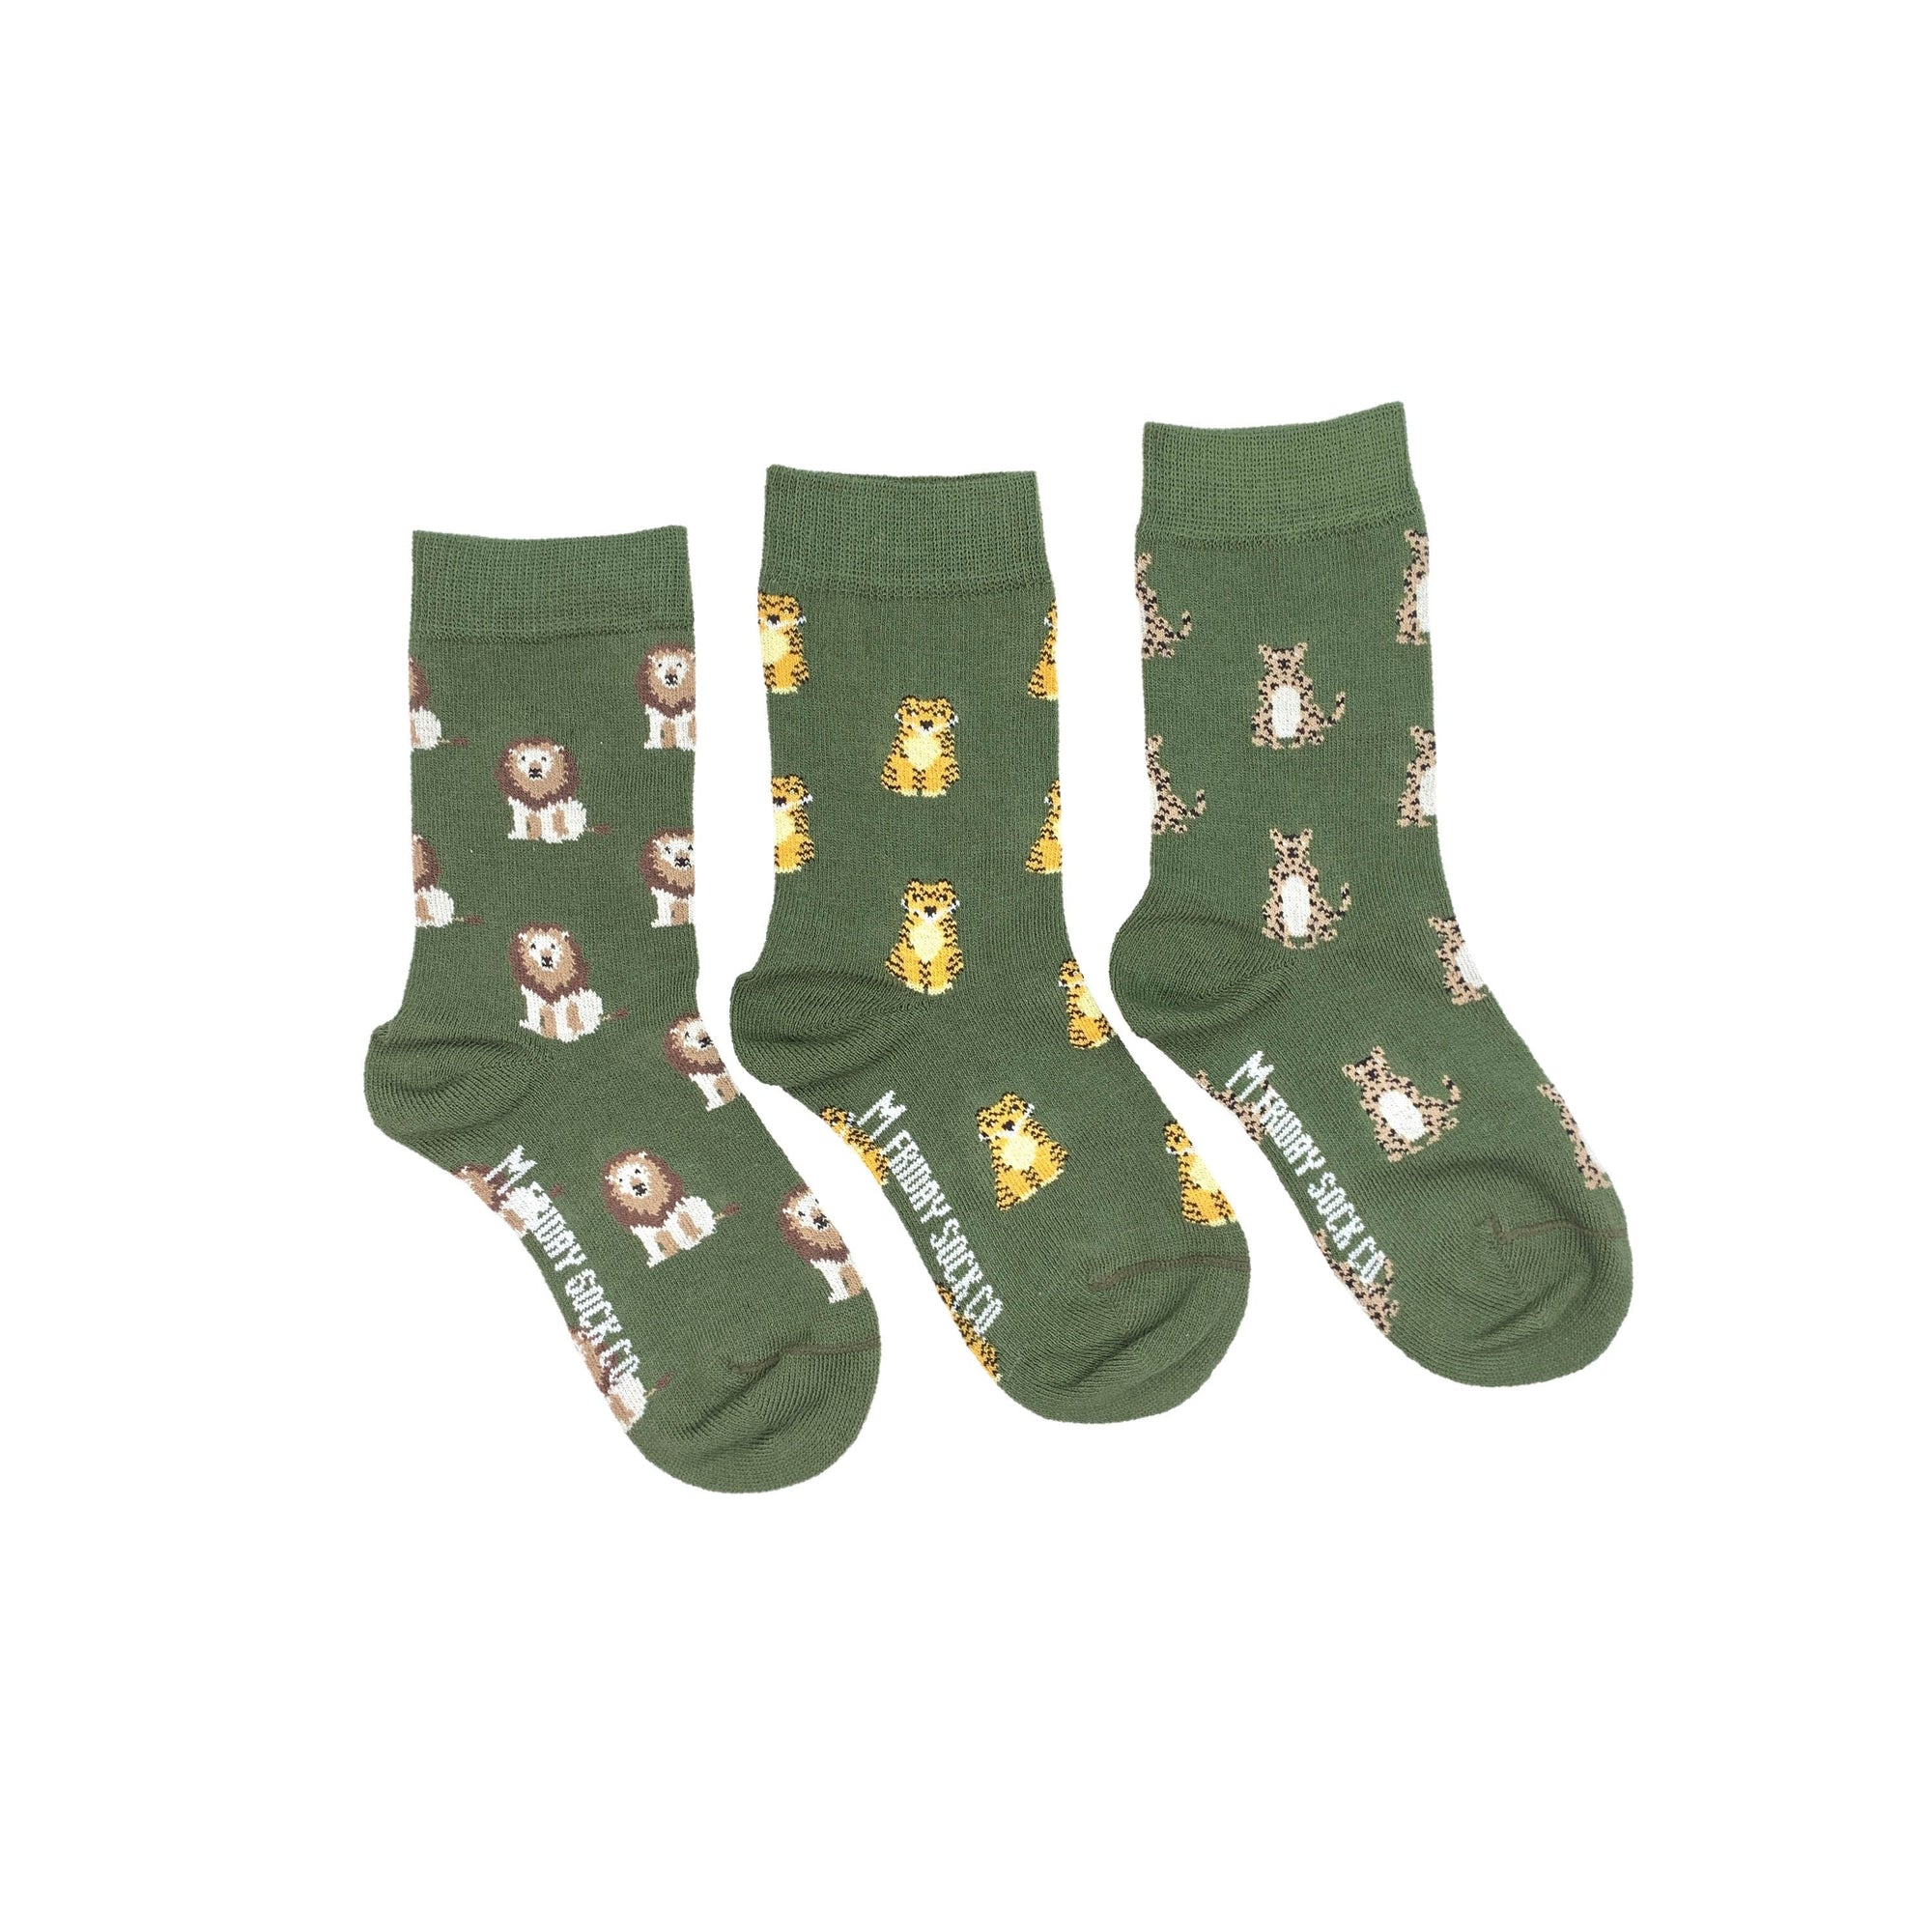 Kid's Lion, Tiger & Cheetah Mismatched Socks - 1 Left Size 8-12 years-Friday Sock Co.-Modern Rascals